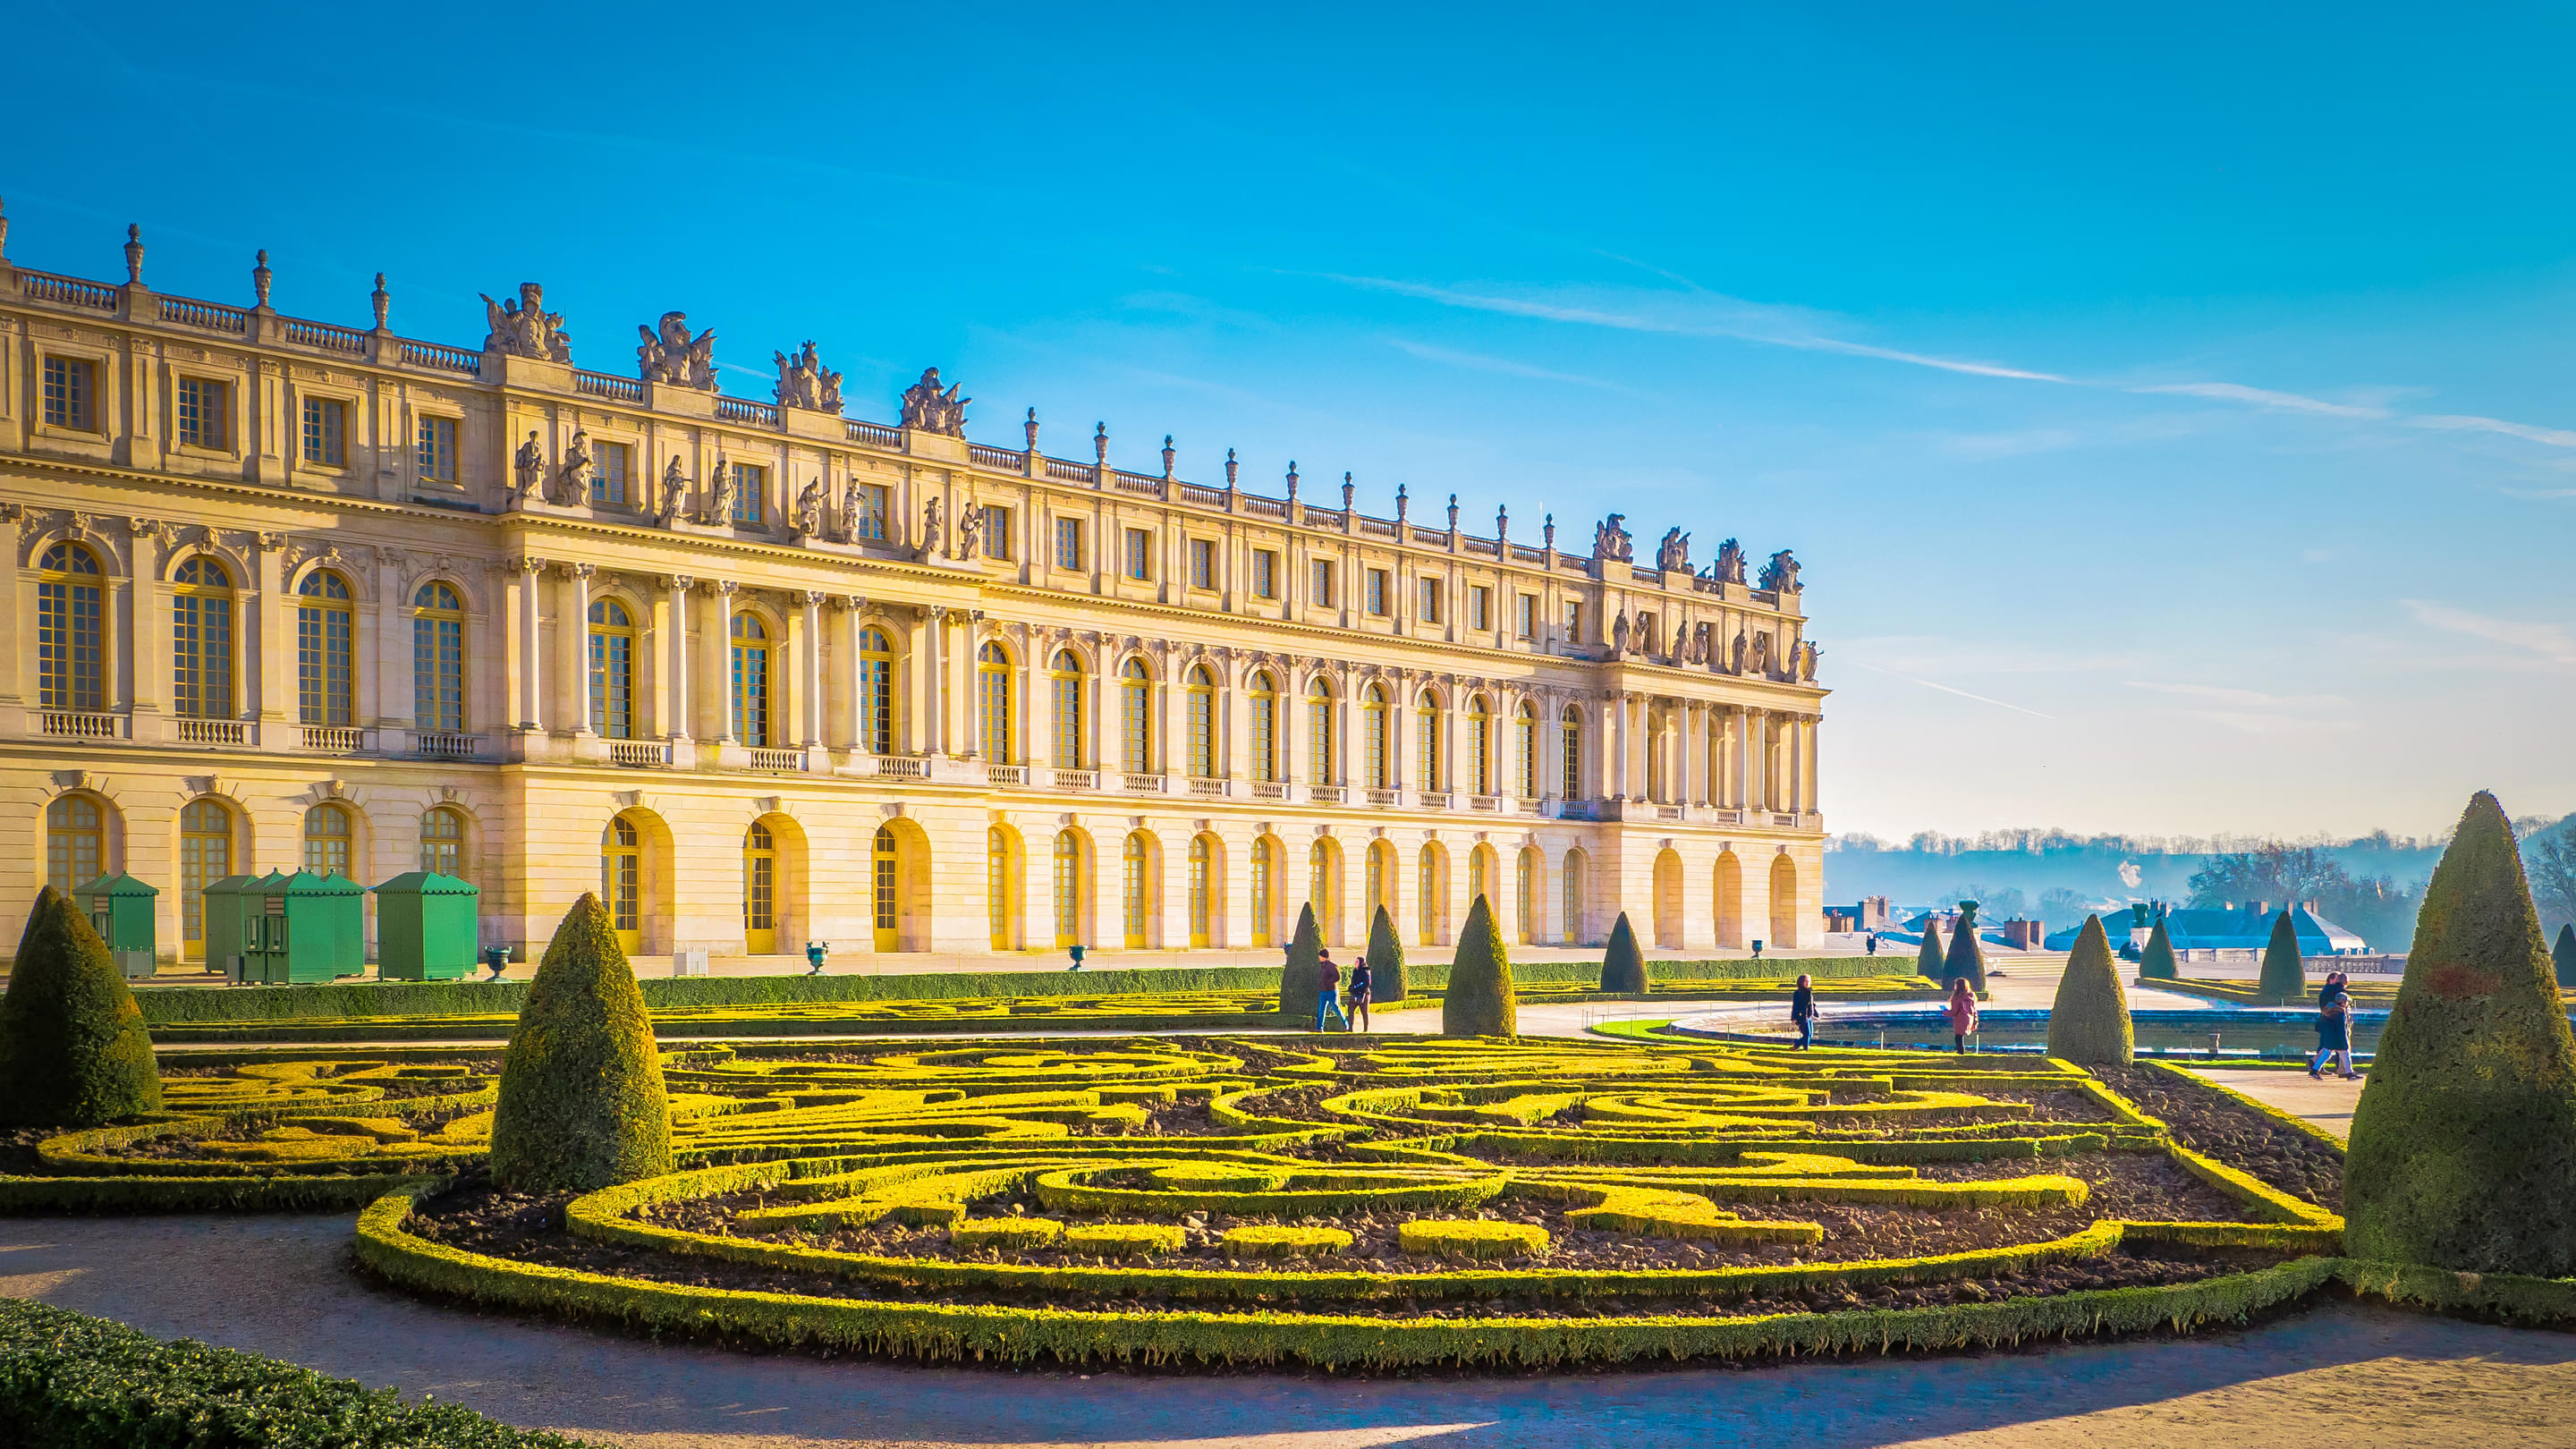 Palace Of Versailles Overview